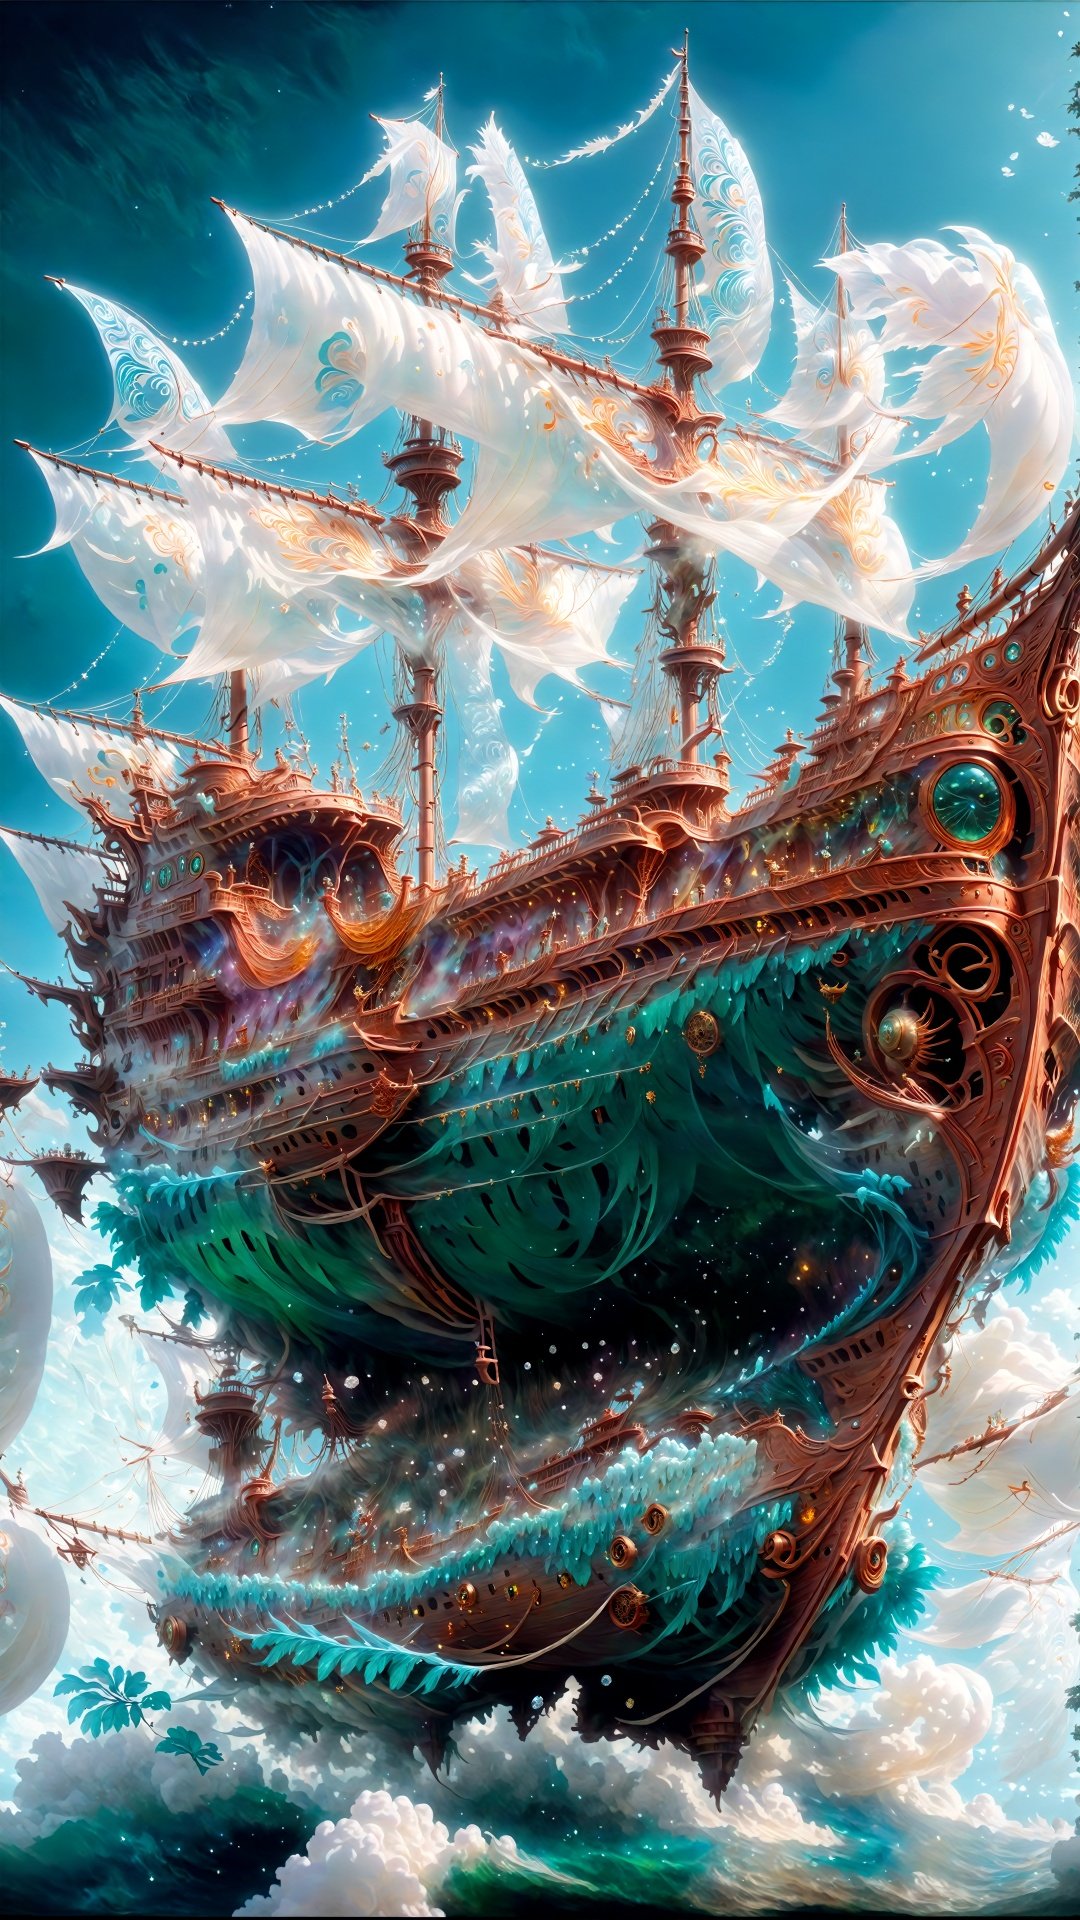  (Fantasy ancient ship style: 1.5) (Hyper-realistic thick paint) (Oriental ship concept) From a small angle, shocking, huge, visual impact, full-body ship (complex details) This immortal ship is like a huge fairy boat floating in the clouds . The hull is made of transparent crystal architecture, surrounded by floating fairy energy. The sails are woven from feathers and vines, painted with ancient runes and fairy designs. Passengers can feel the aura surrounding them, as if they are in a fairyland